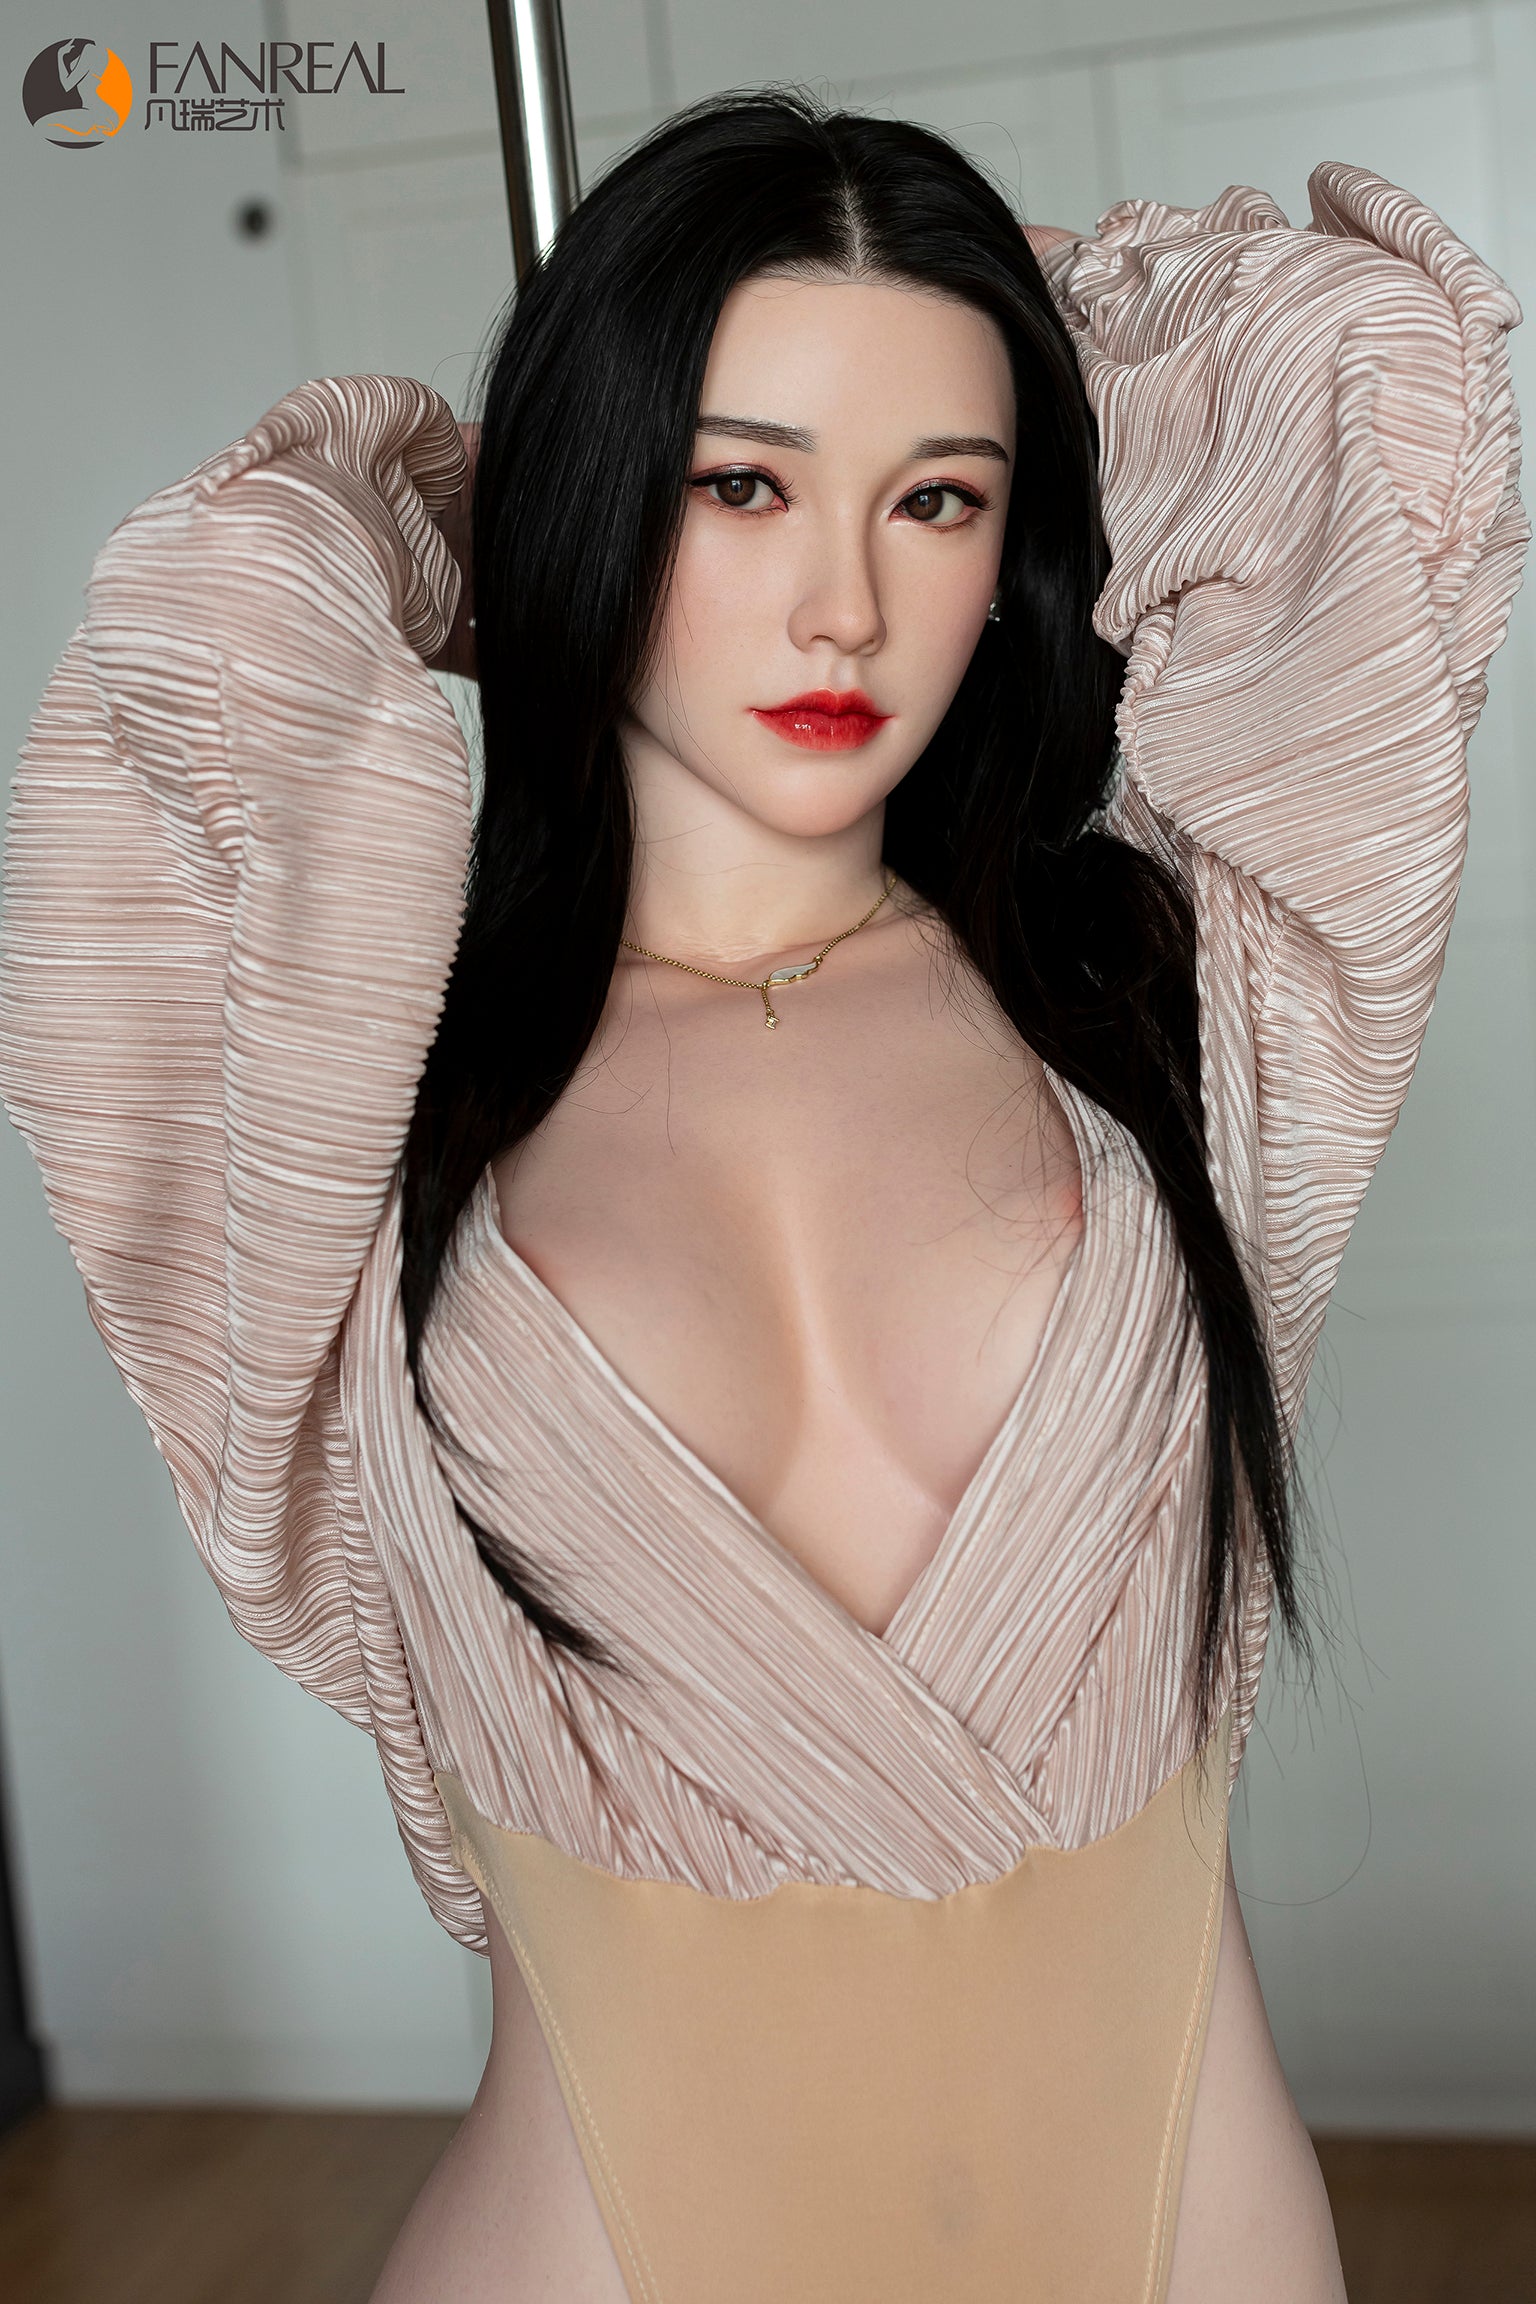 FANREAL DOLL 173 CM D Silicone - Weiwei | Buy Sex Dolls at DOLLS ACTUALLY